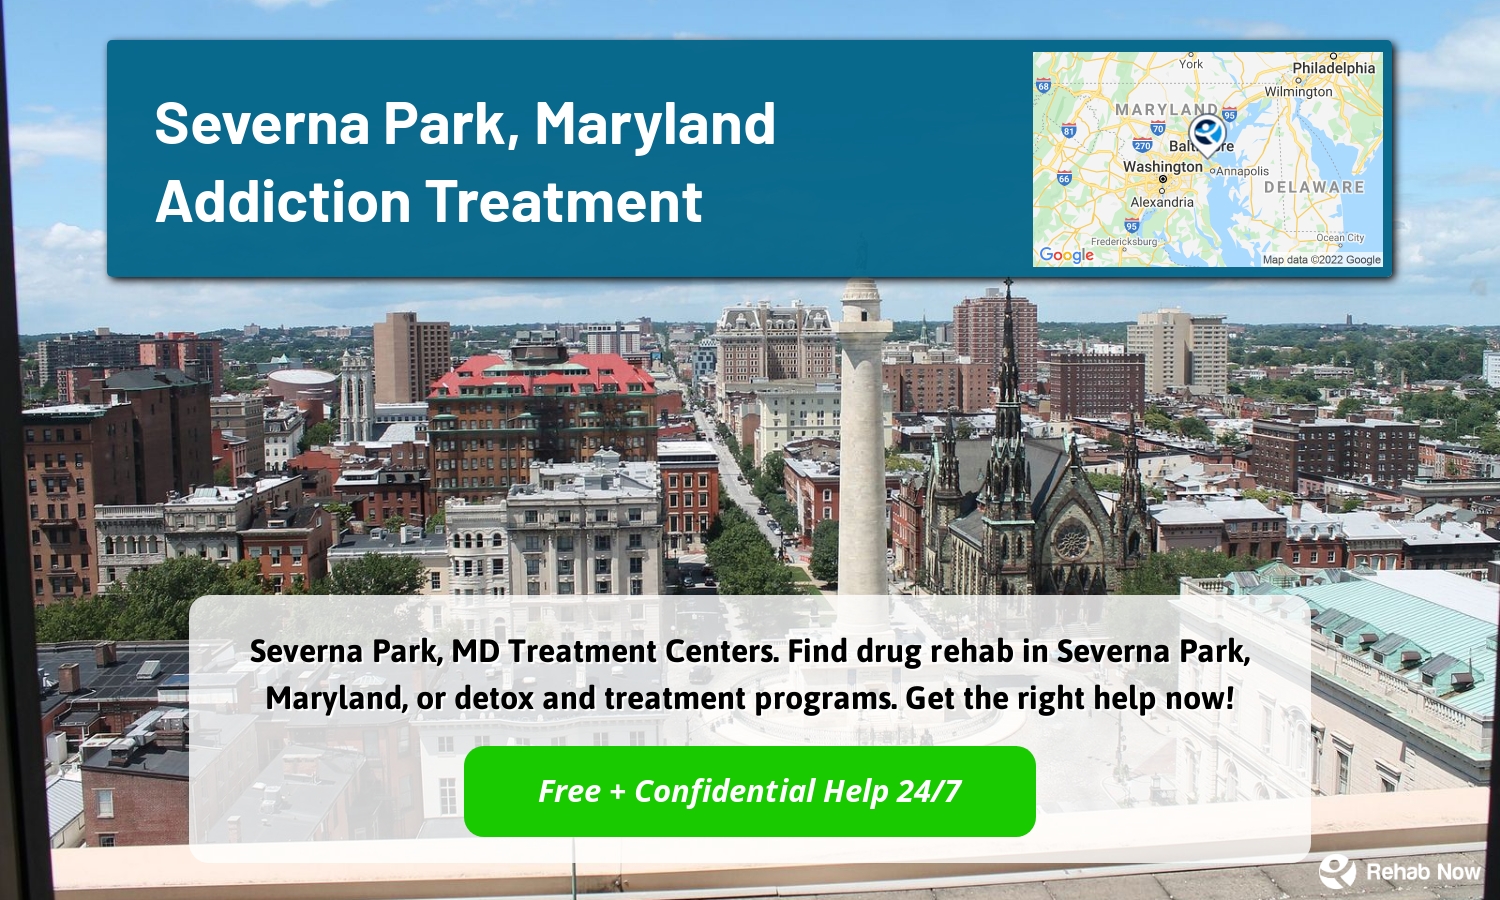 Severna Park, MD Treatment Centers. Find drug rehab in Severna Park, Maryland, or detox and treatment programs. Get the right help now!